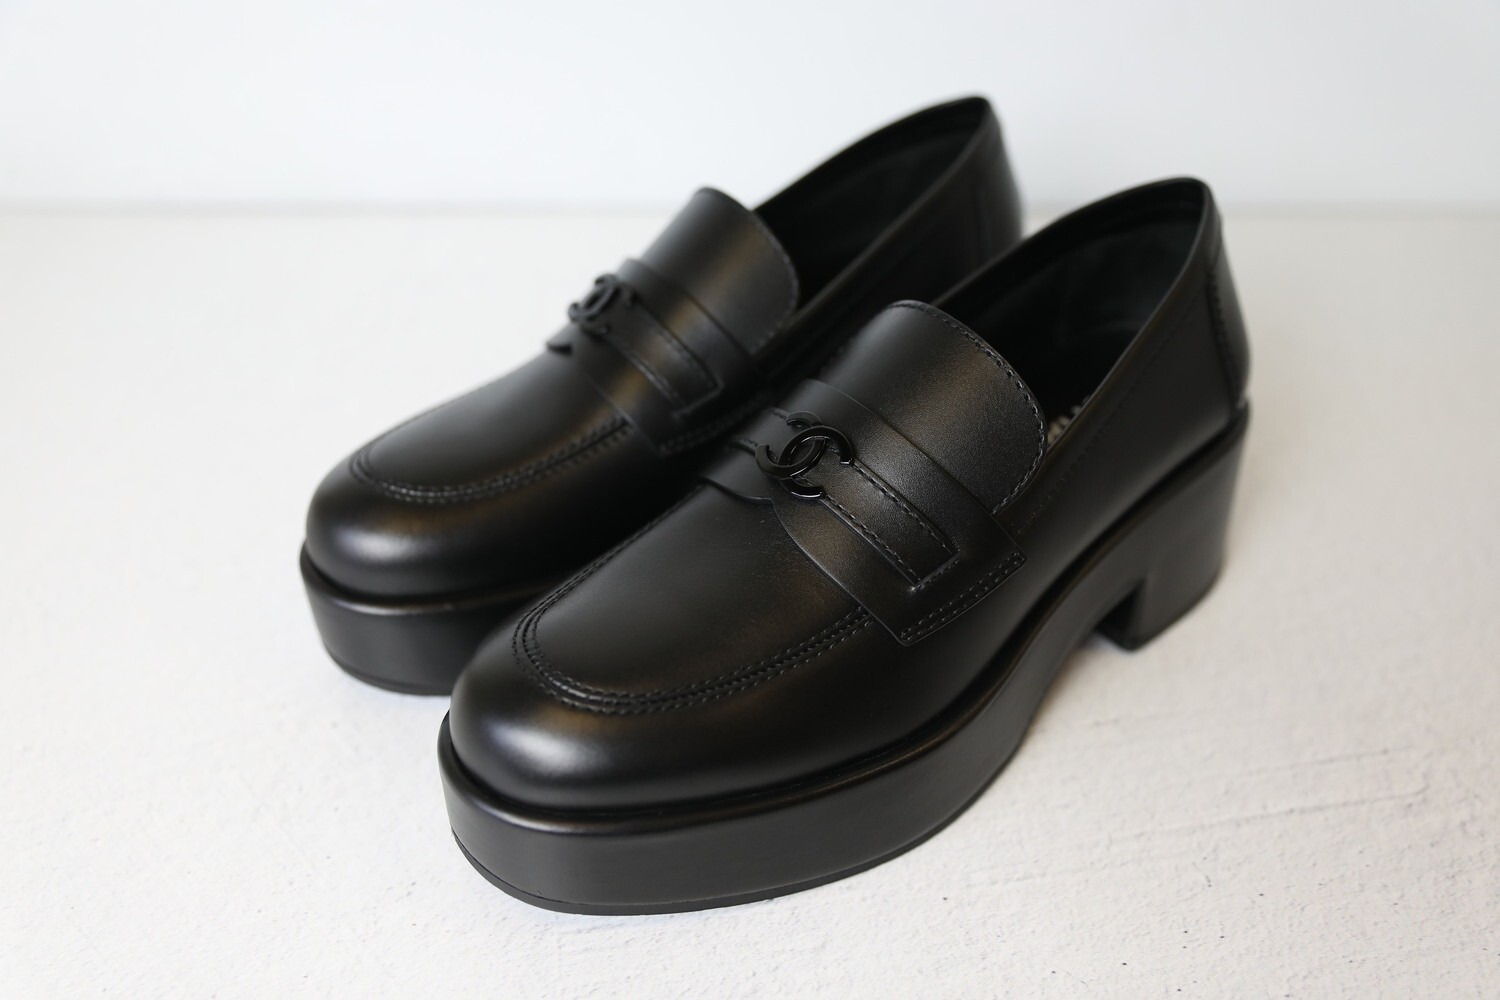 Chanel Loafers, Black, Size 39, New in Box WA001